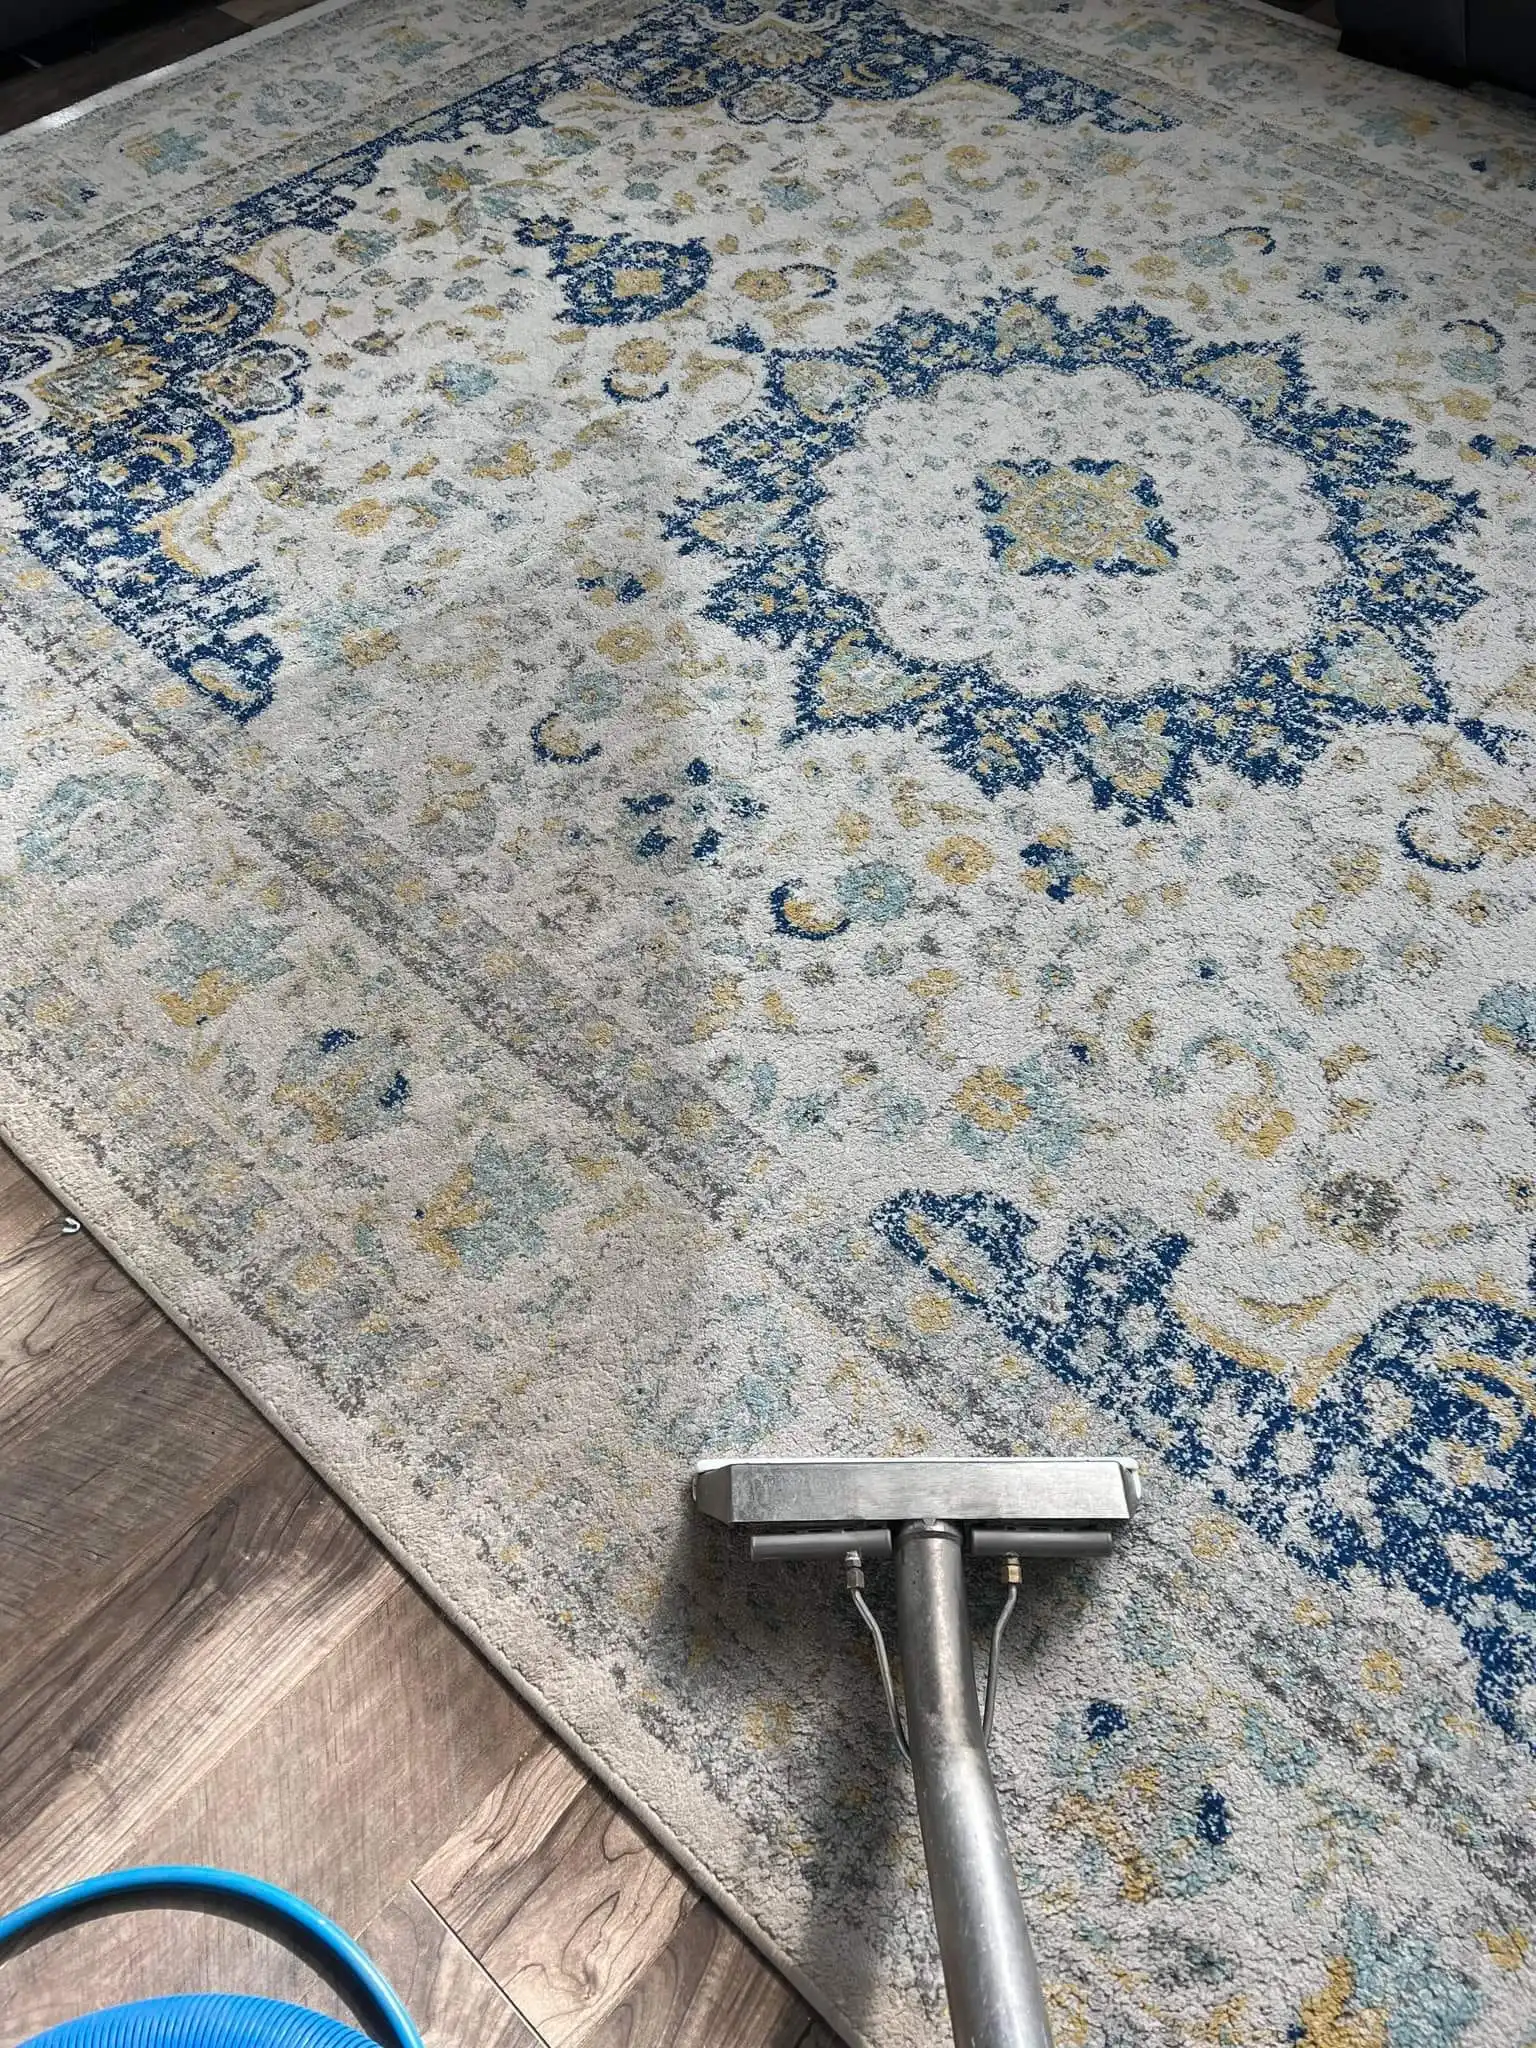 Can I Use a Carpet Cleaner on an Area Rug? Vital Clean’s Insights